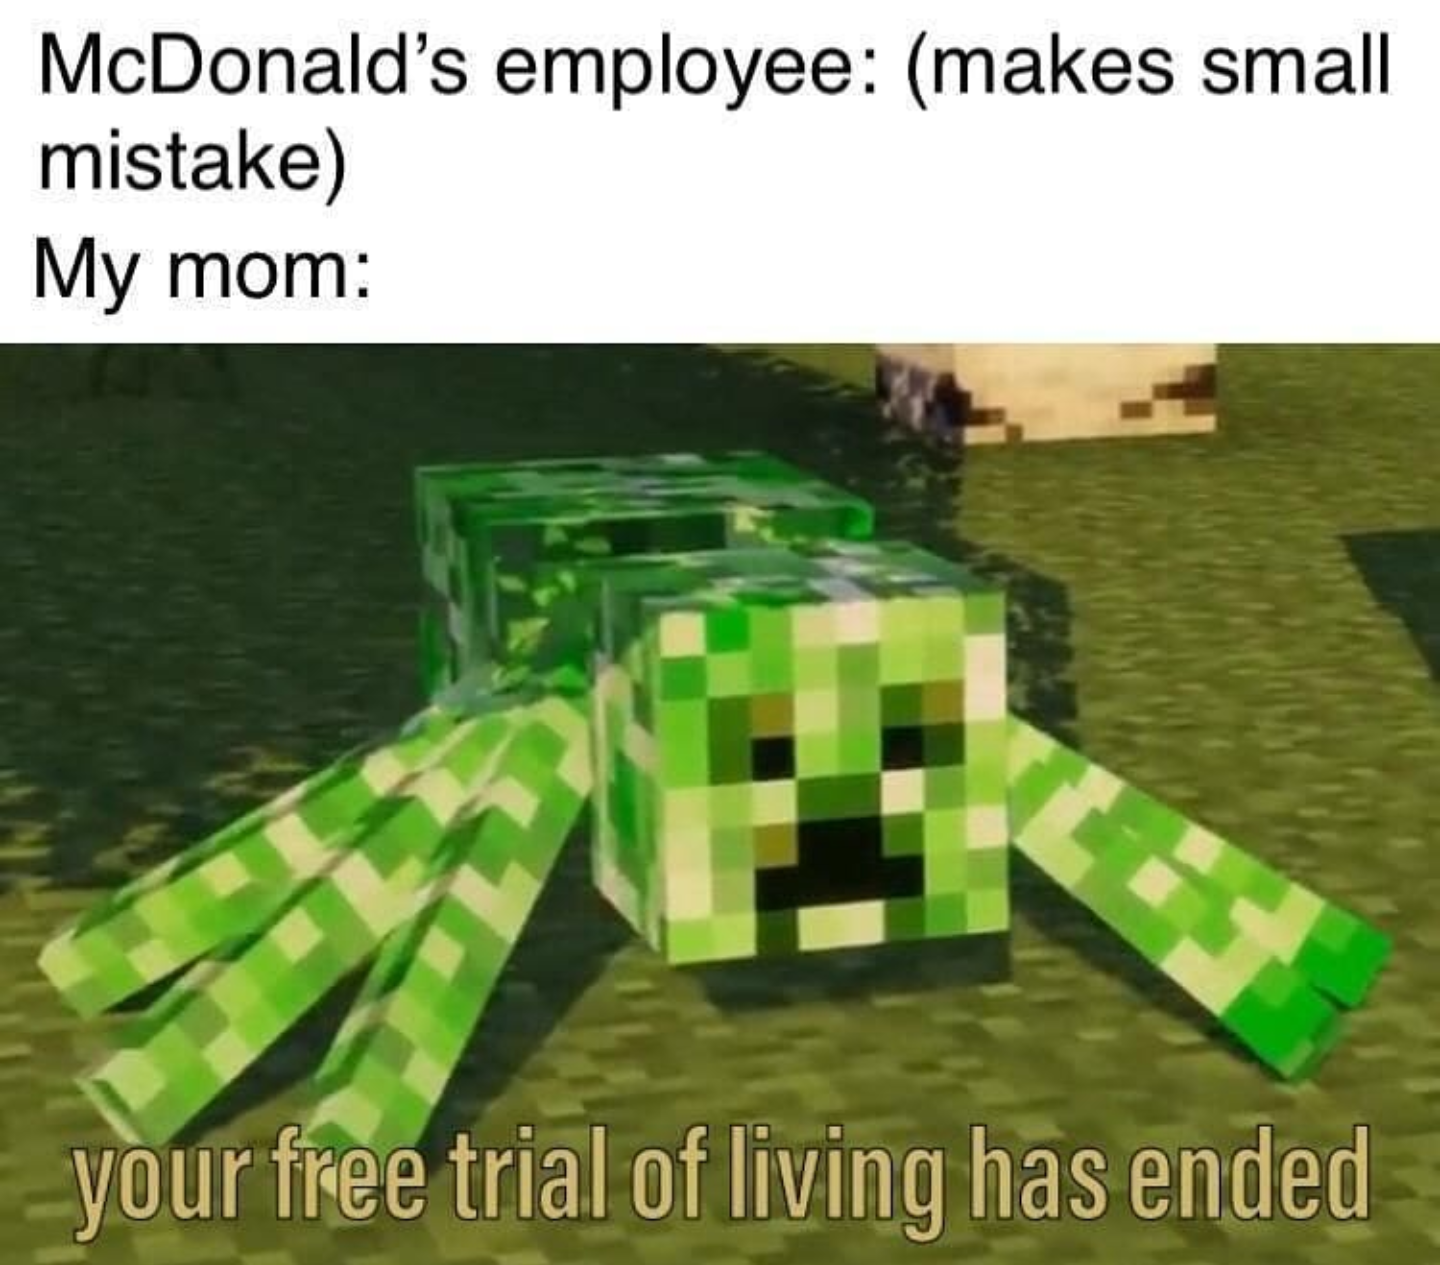 your free trial of living has ended meme - McDonald's employee makes small mistake My mom _your free trial of living has ended